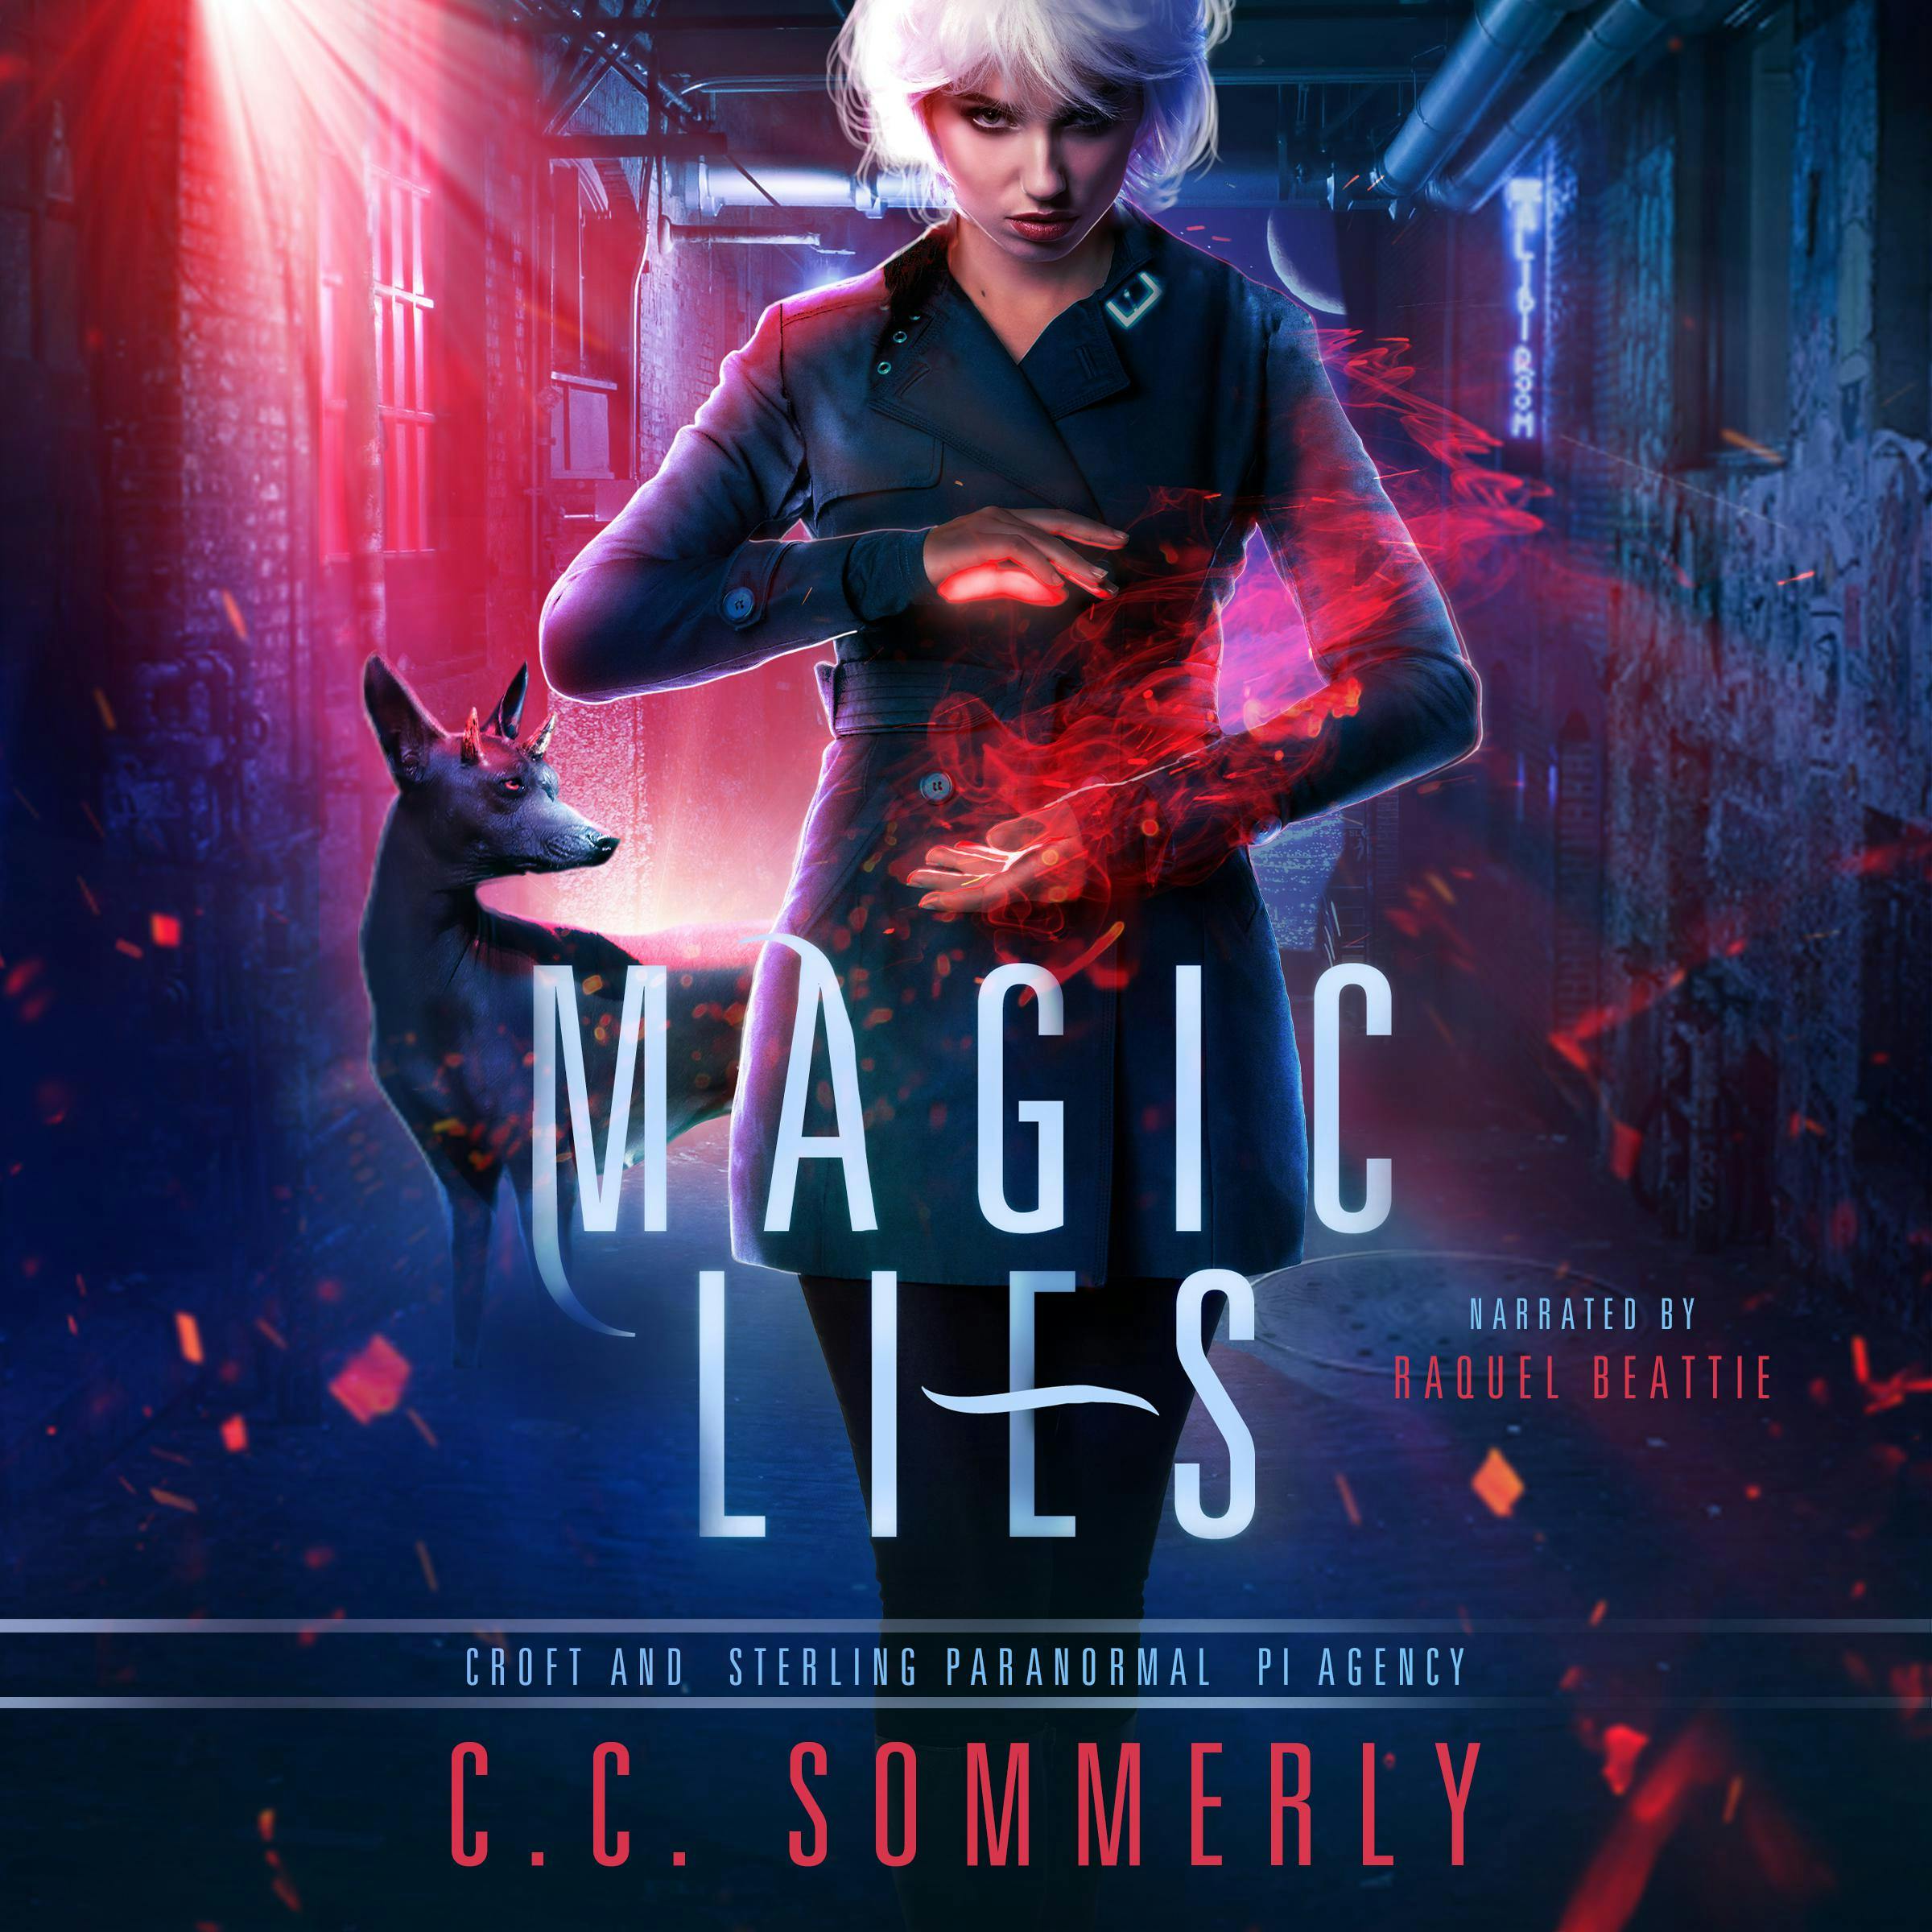 Magic Lies: Croft and Sterling Paranormal PI Agency - C.C. Sommerly